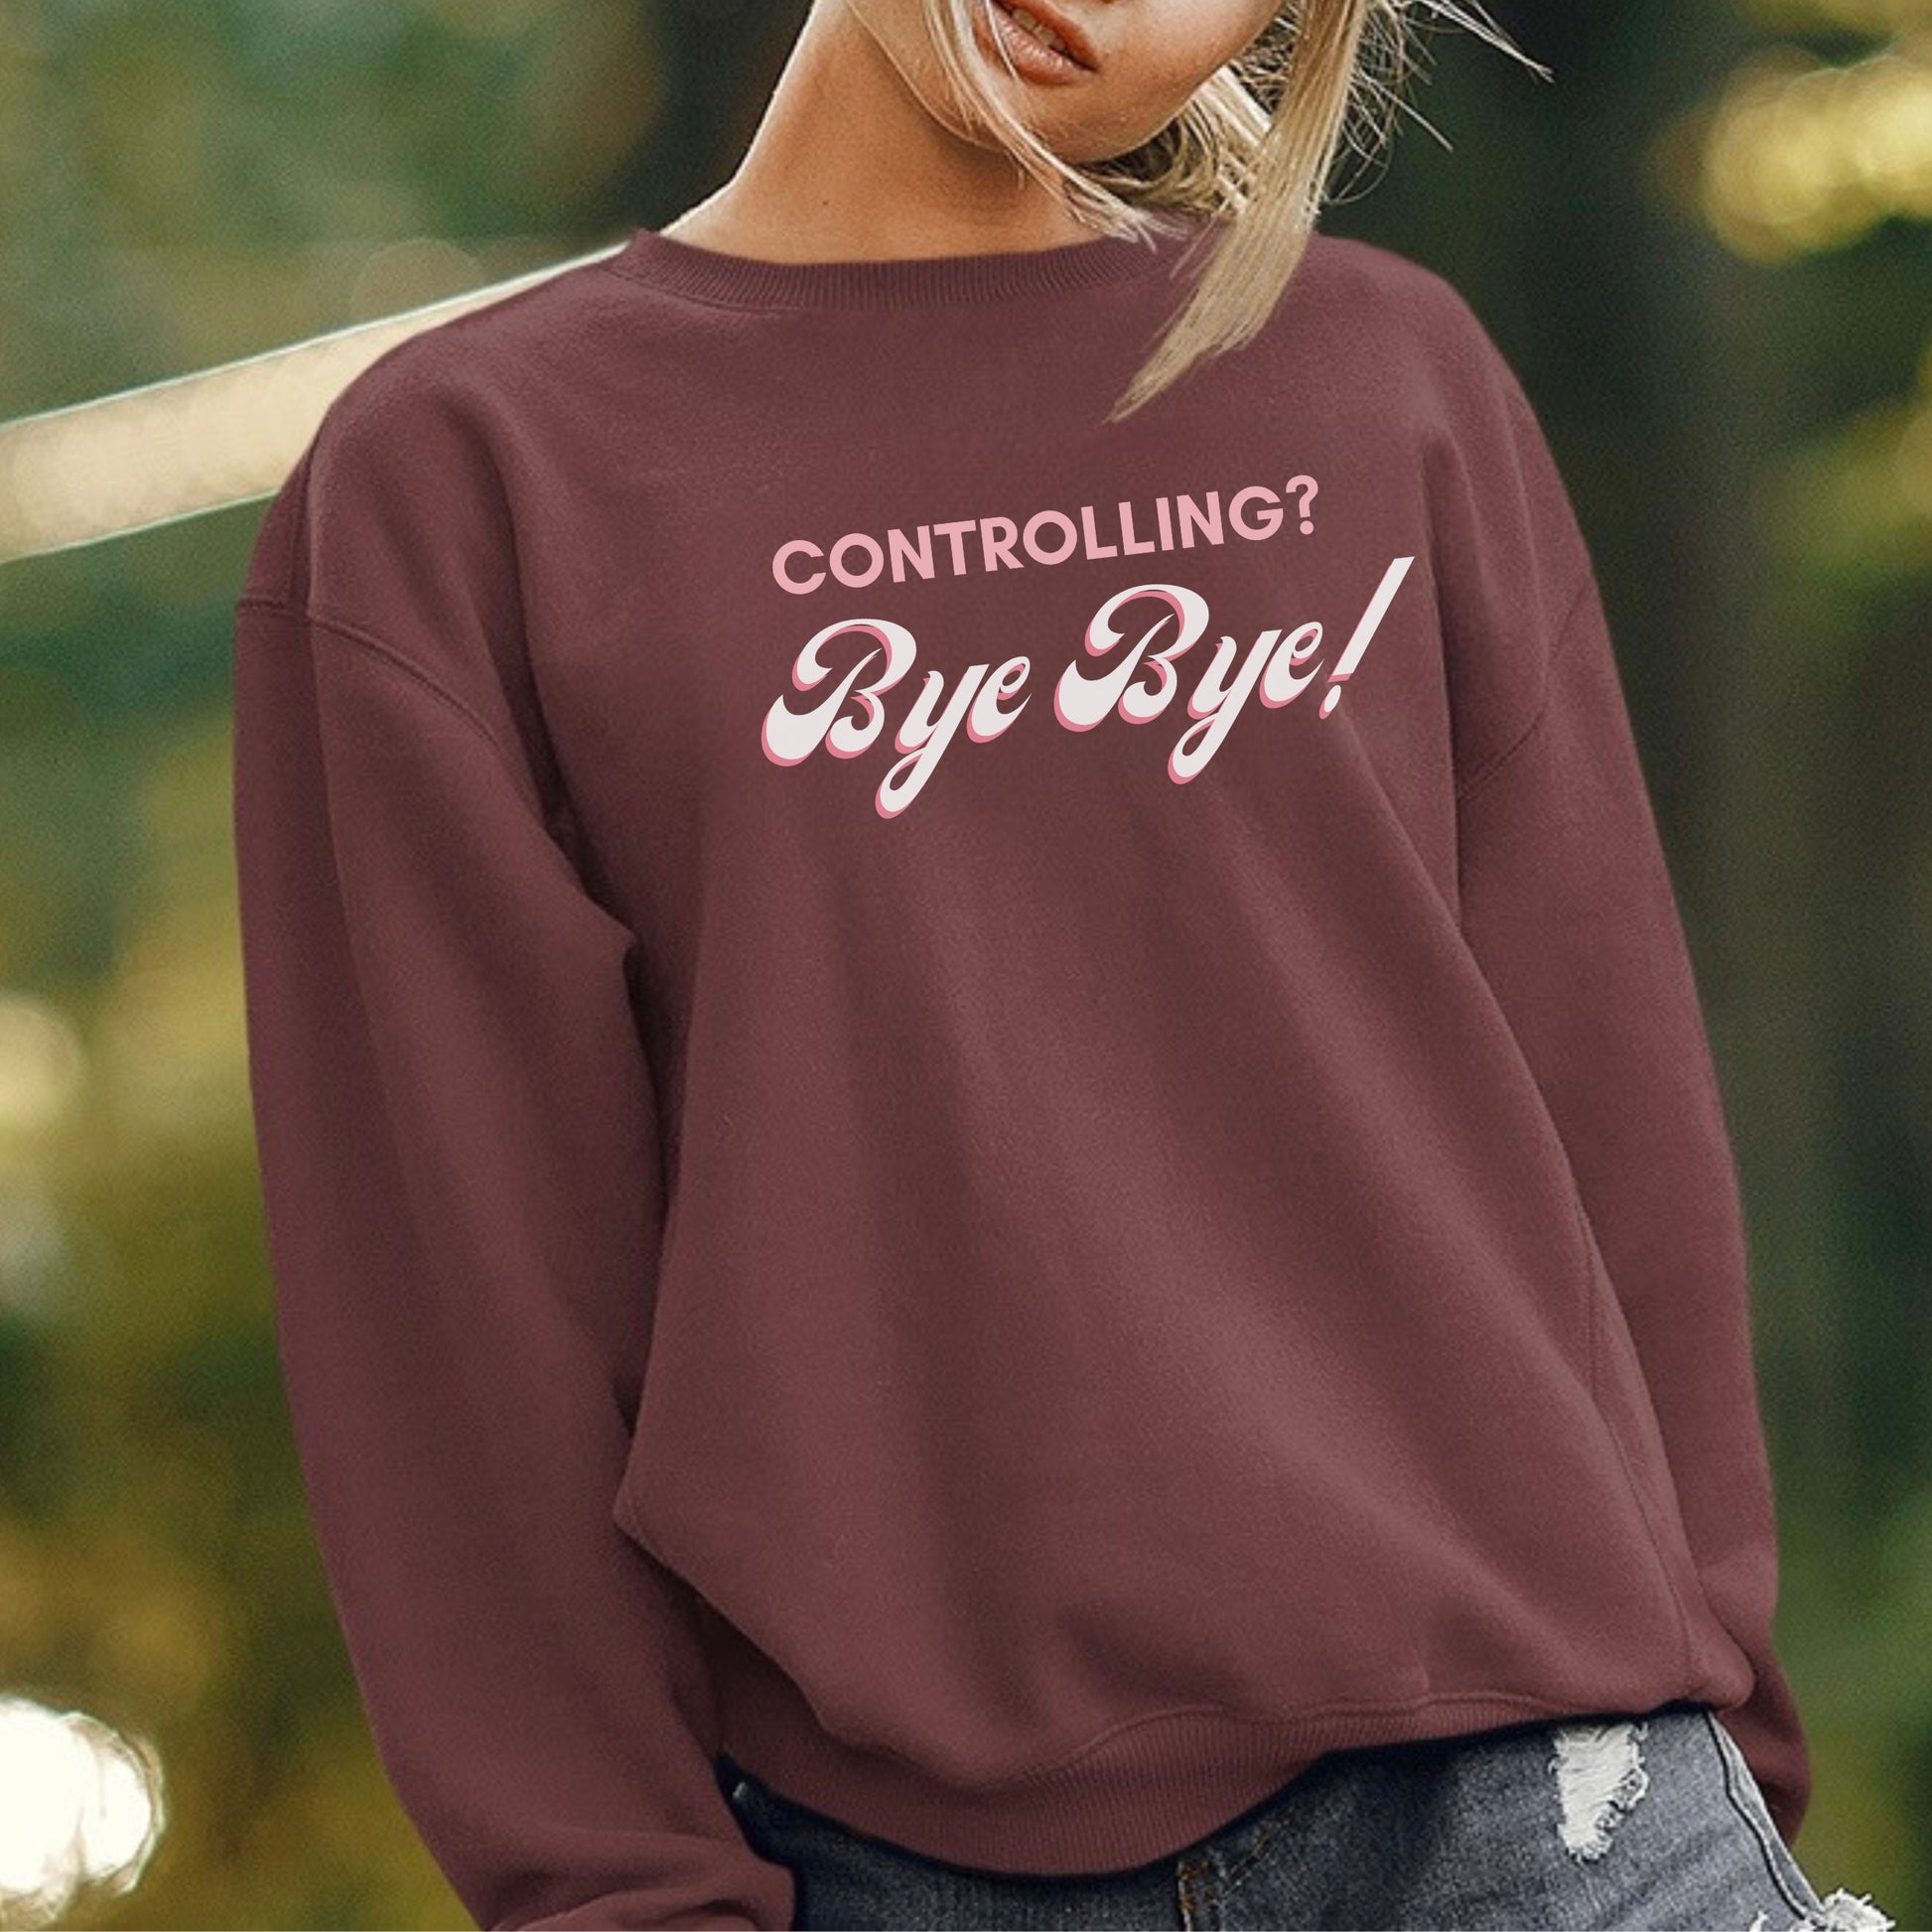 The front of the sweatshirt proudly displays the phrase "Controlling? Bye Bye!" in a bold and eye-catching font. This message serves as a reminder that love is not controlling. Tailored for domestic violence and teen dating violence advocates.